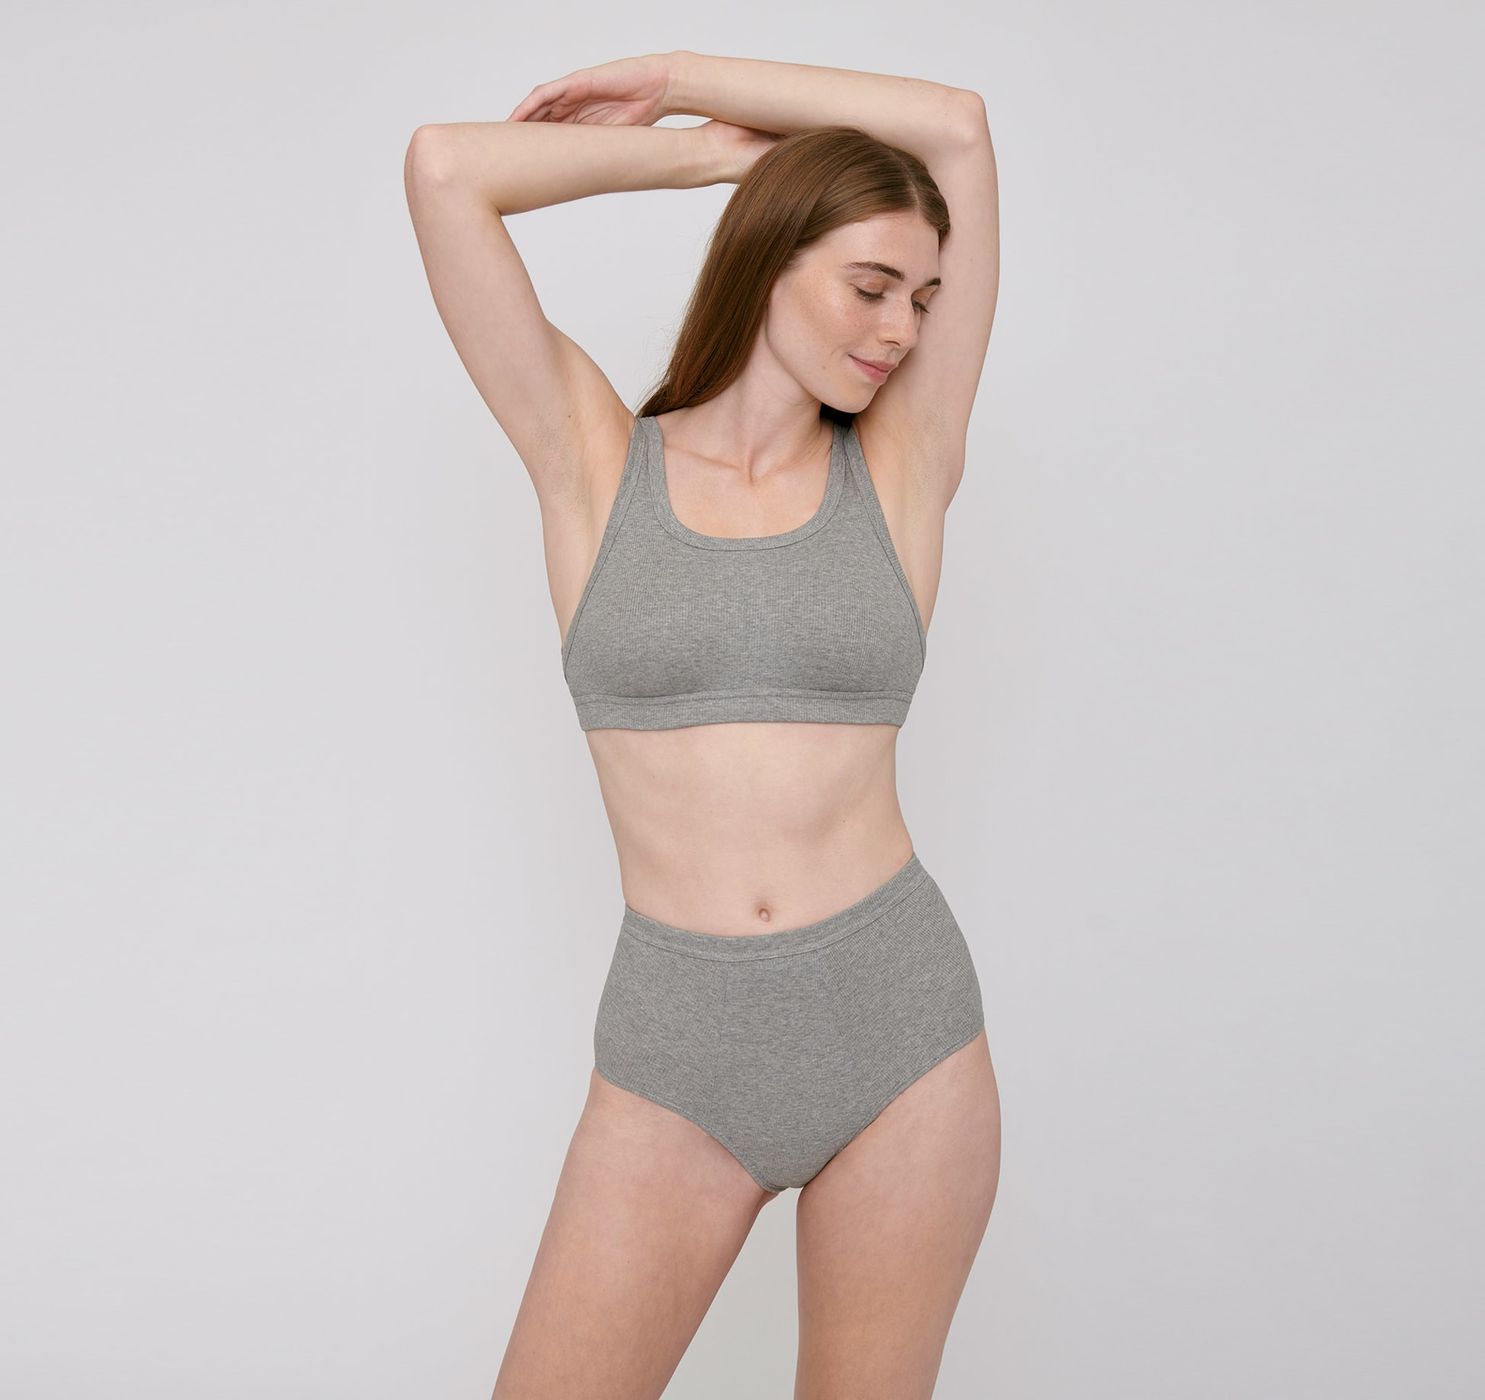 Organic Cotton Underwear For Women - Frank And Oak Canada Bra And Bralette  Collection Launch